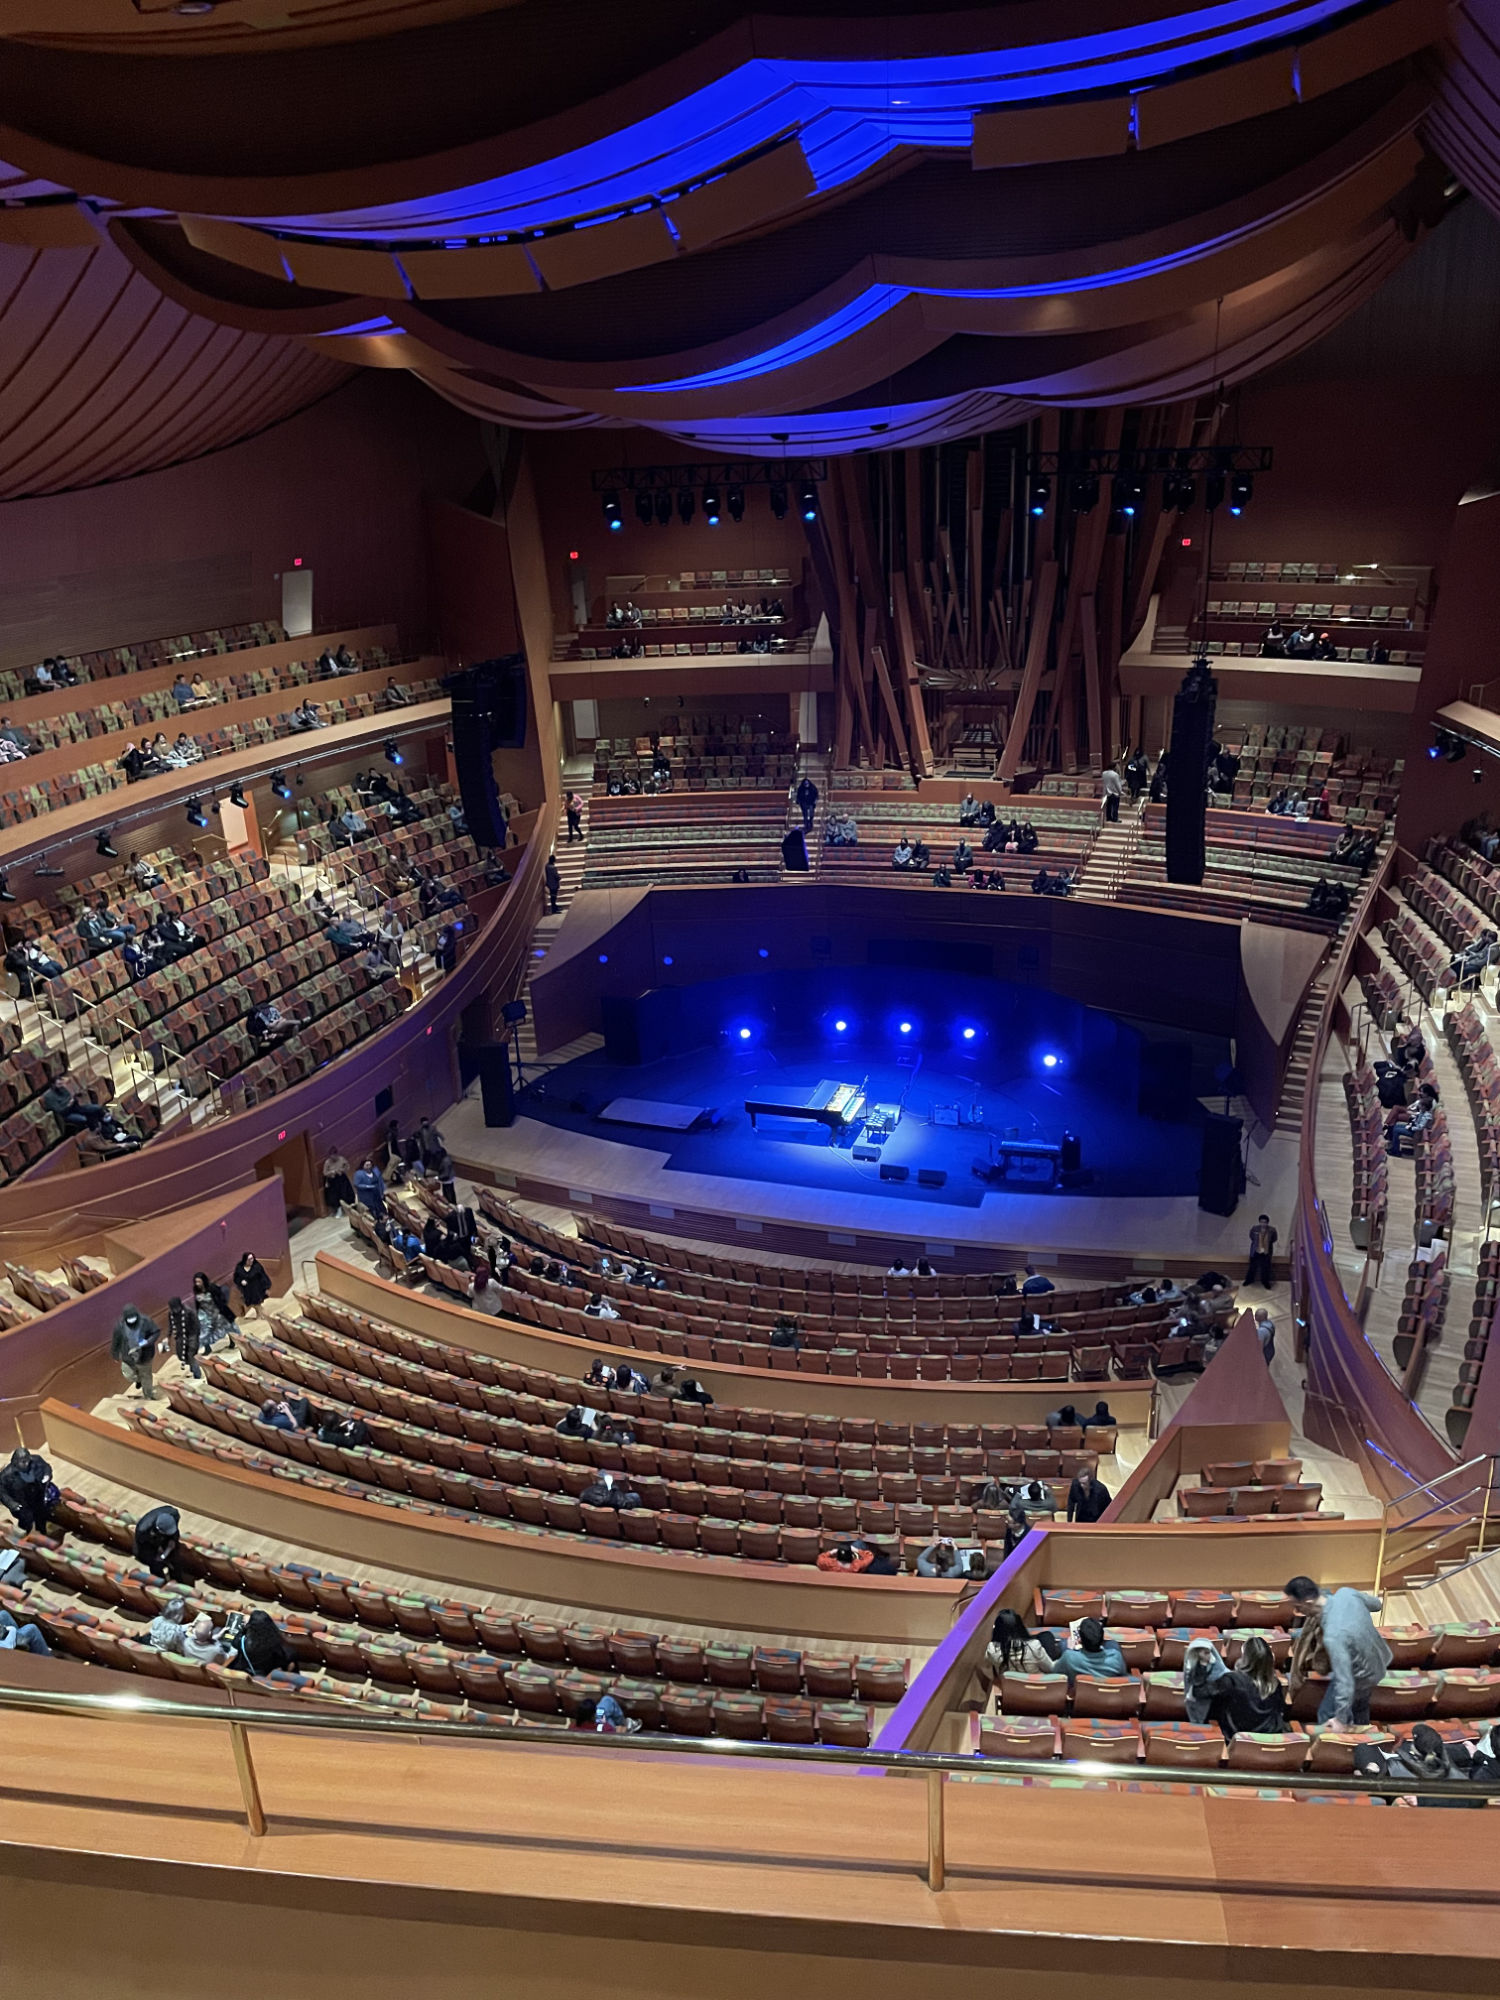 The Walt Disney Concert Hall from a balcony seat. The seats are in aligned in curves. On the sage, there is a pinao and an electronic keyboard.